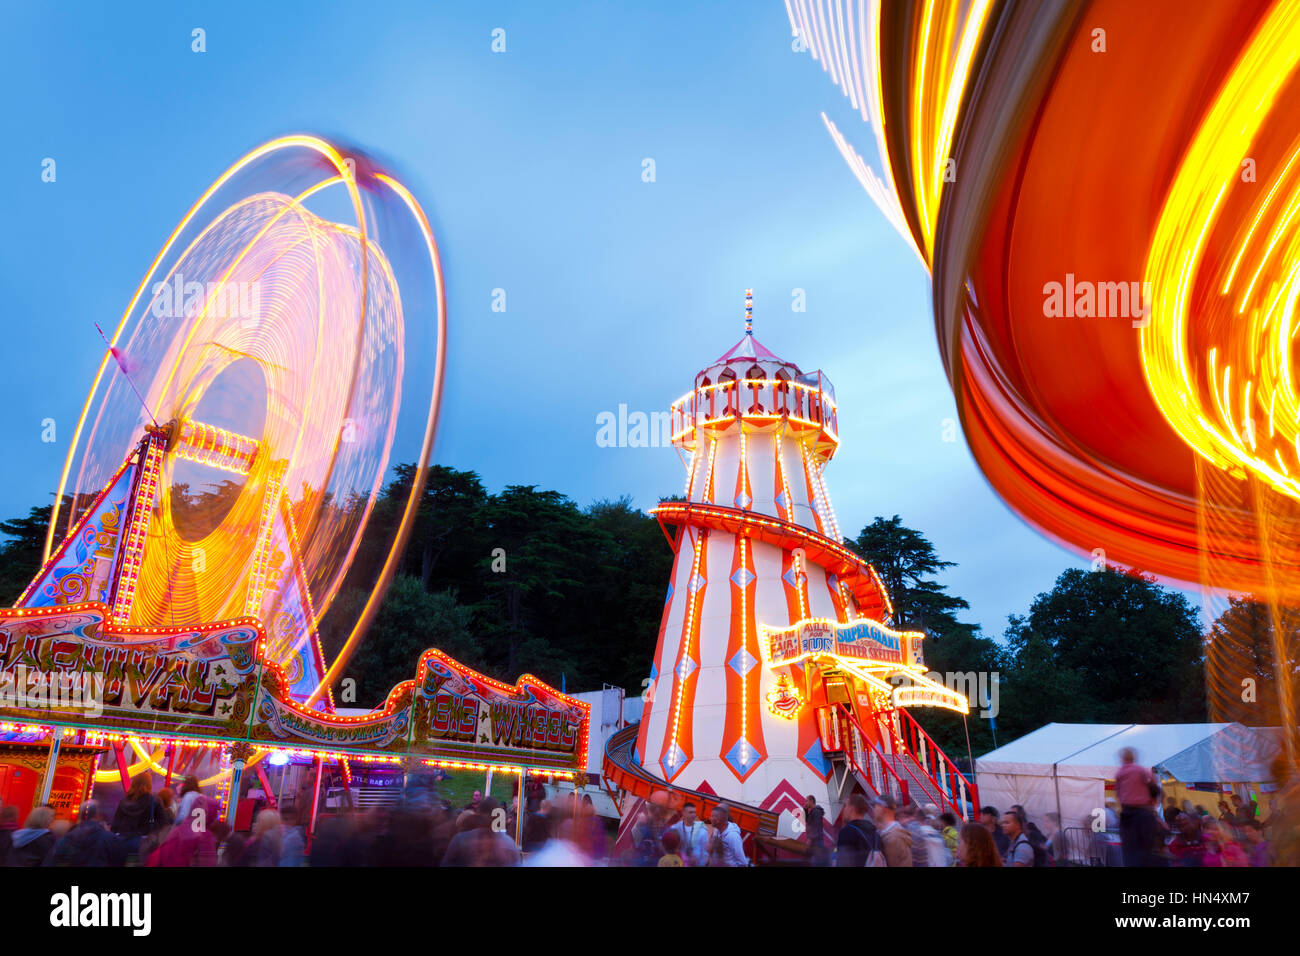 Bristol, United Kingdom - August 13, 2011: Evening Funfair rides within the grounds of Ashton Court during the Bristol Balloon Fiesta in 2011. The peo Stock Photo